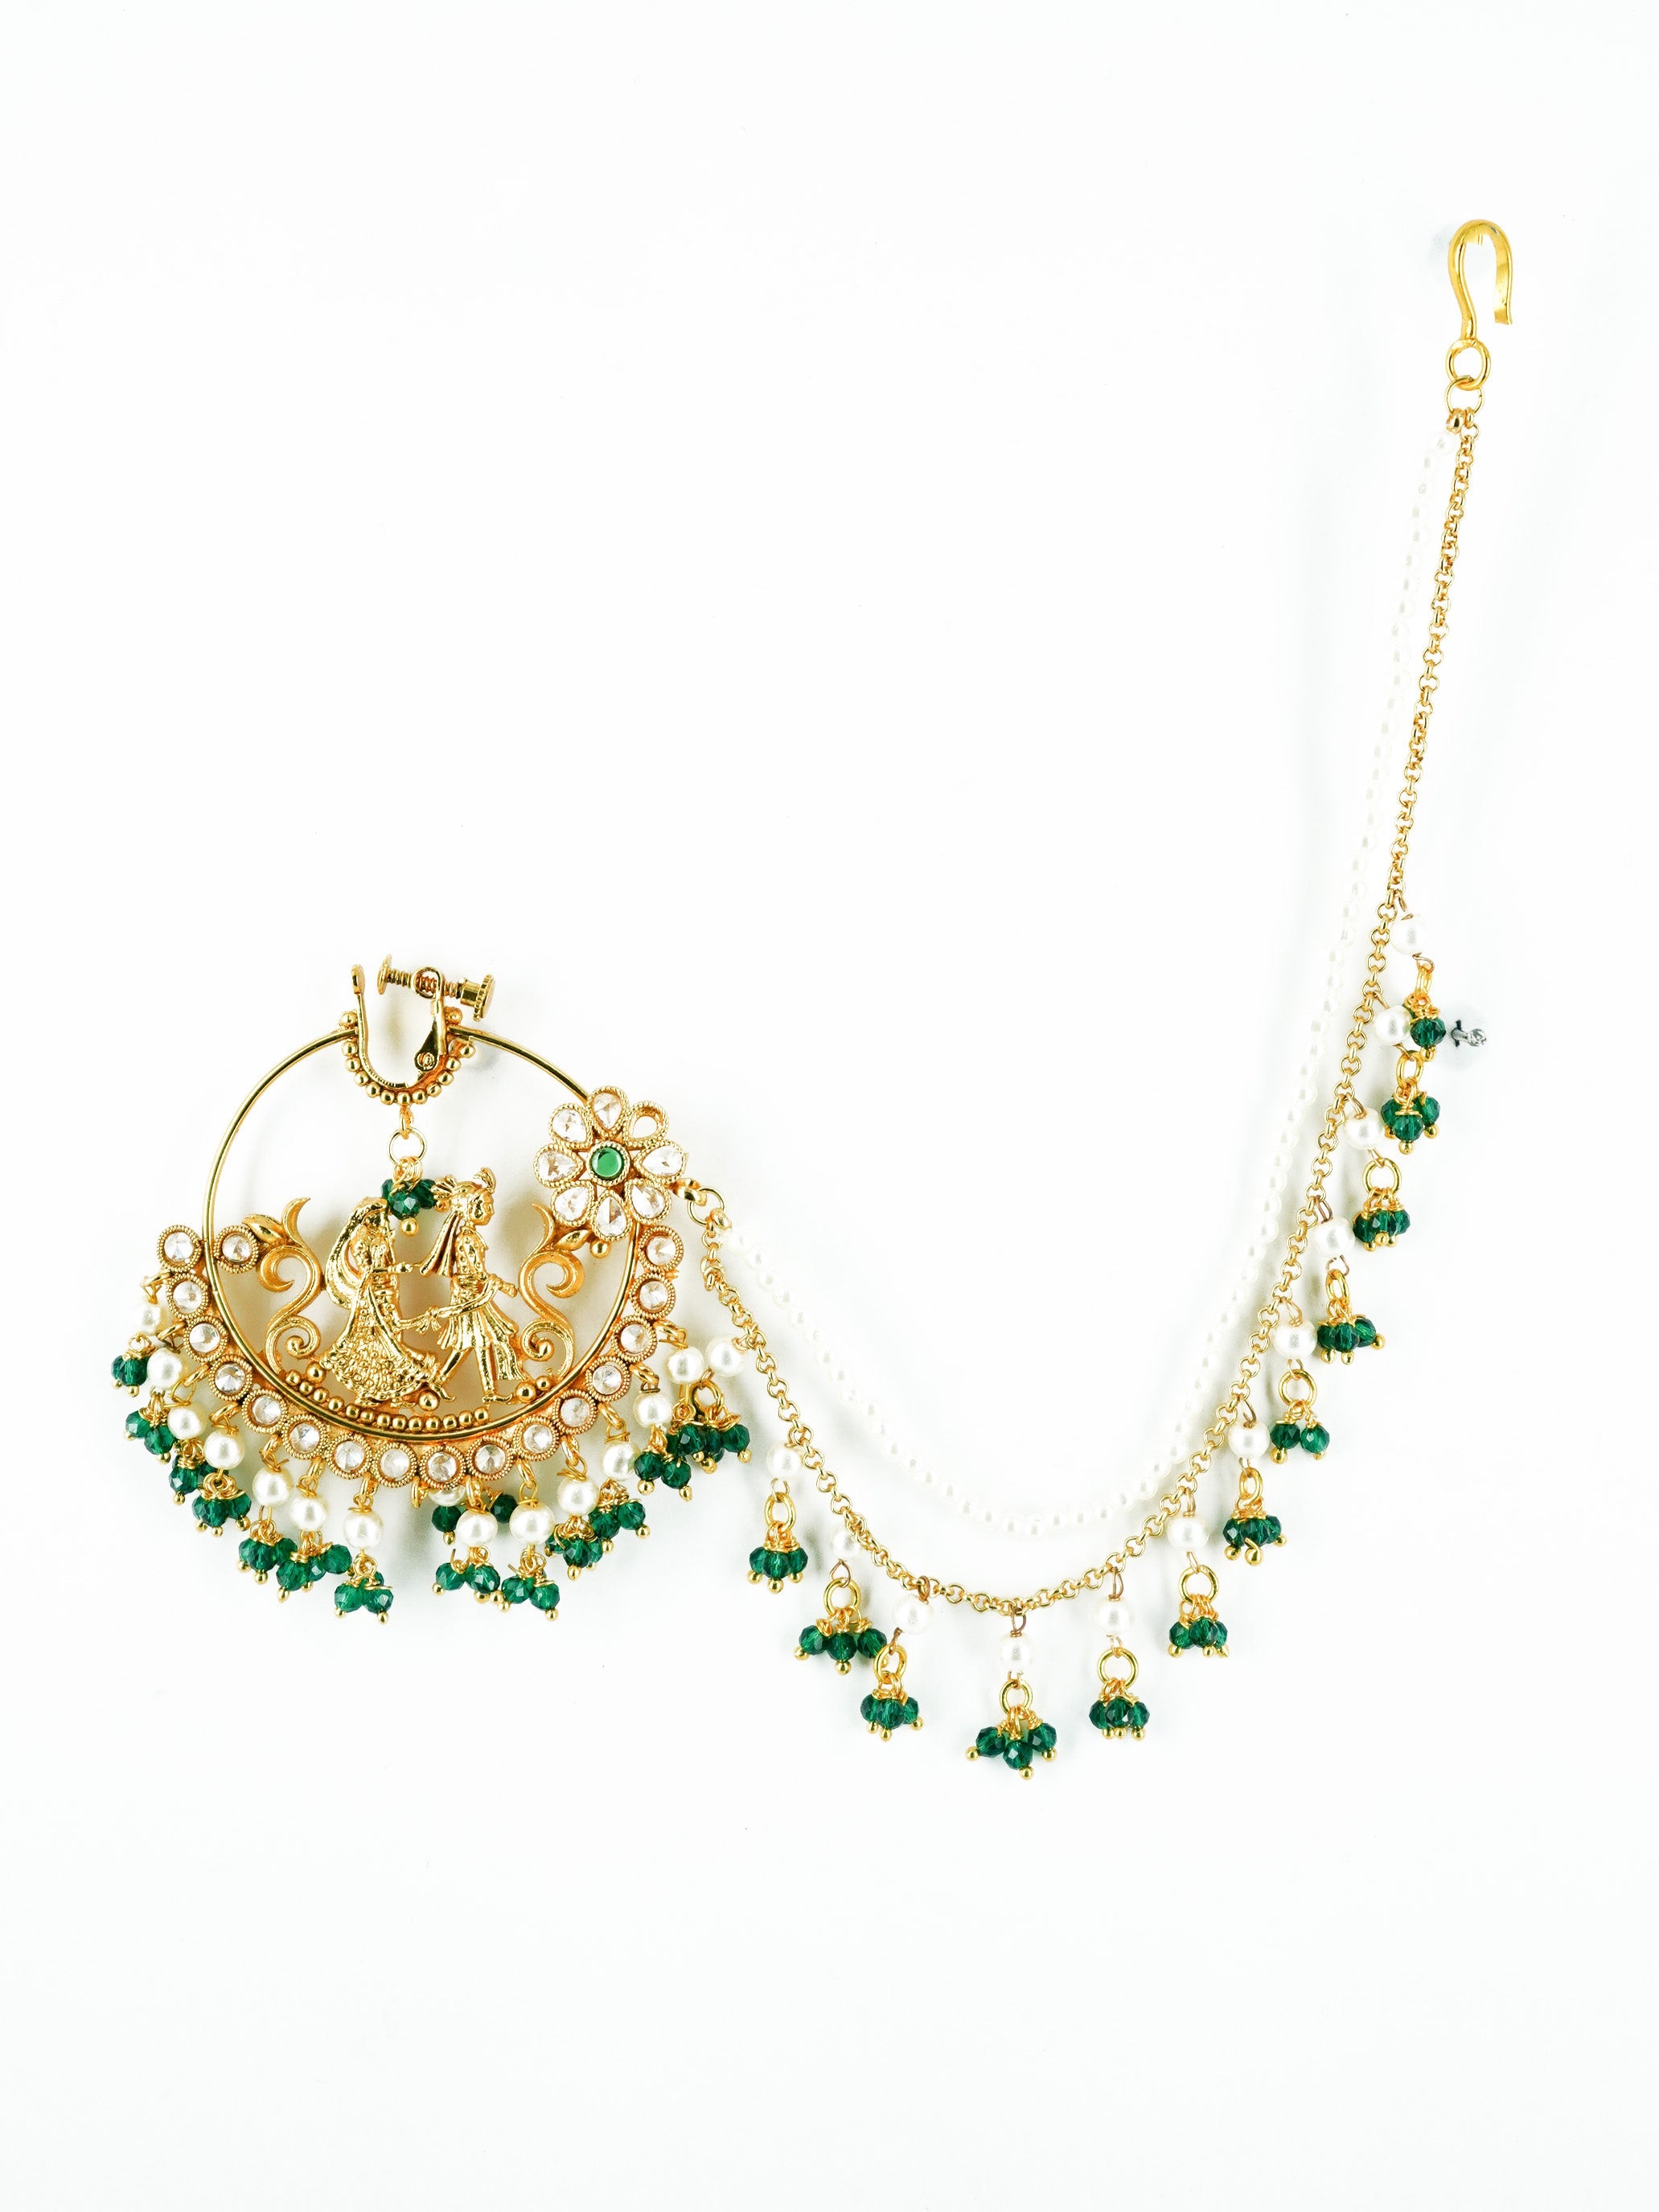 Gold Plated Nosepin / Nath with pearl hanging 9685N